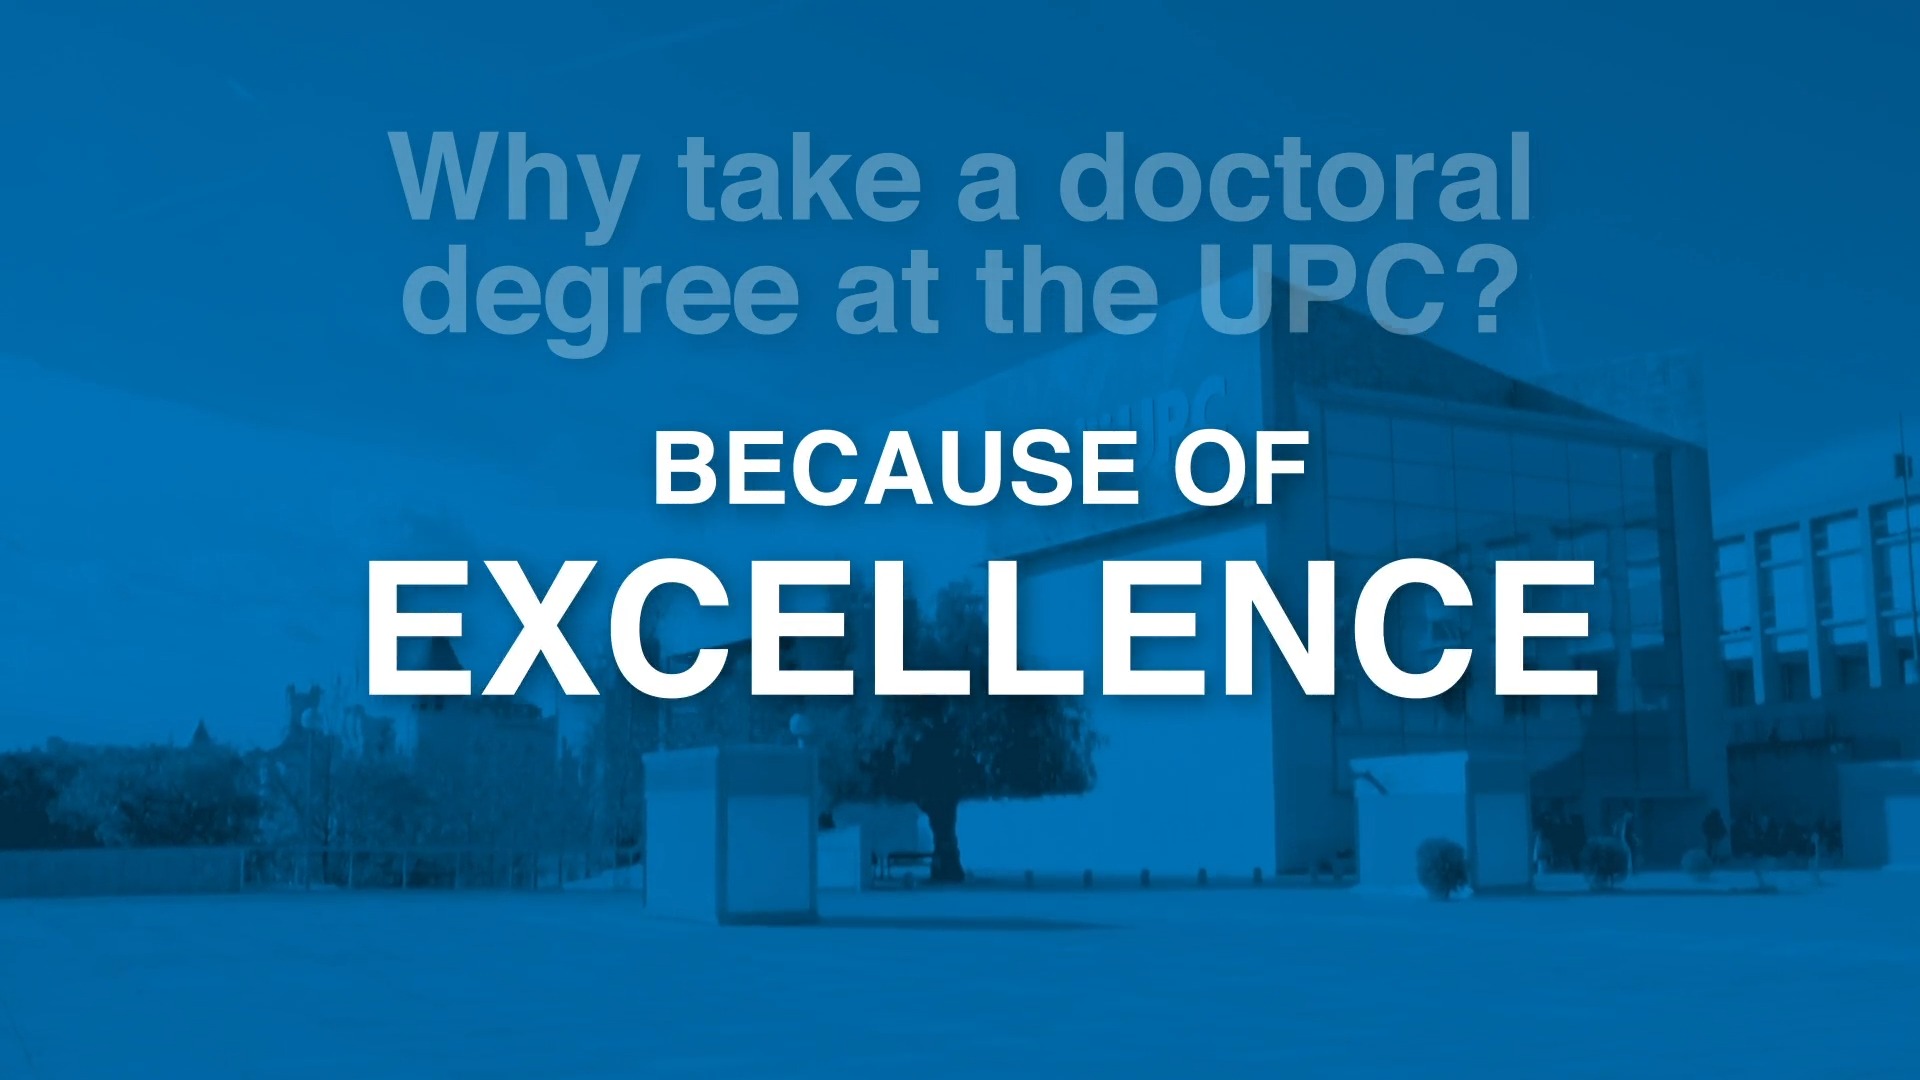 Why take a doctoral degree at the UPC?